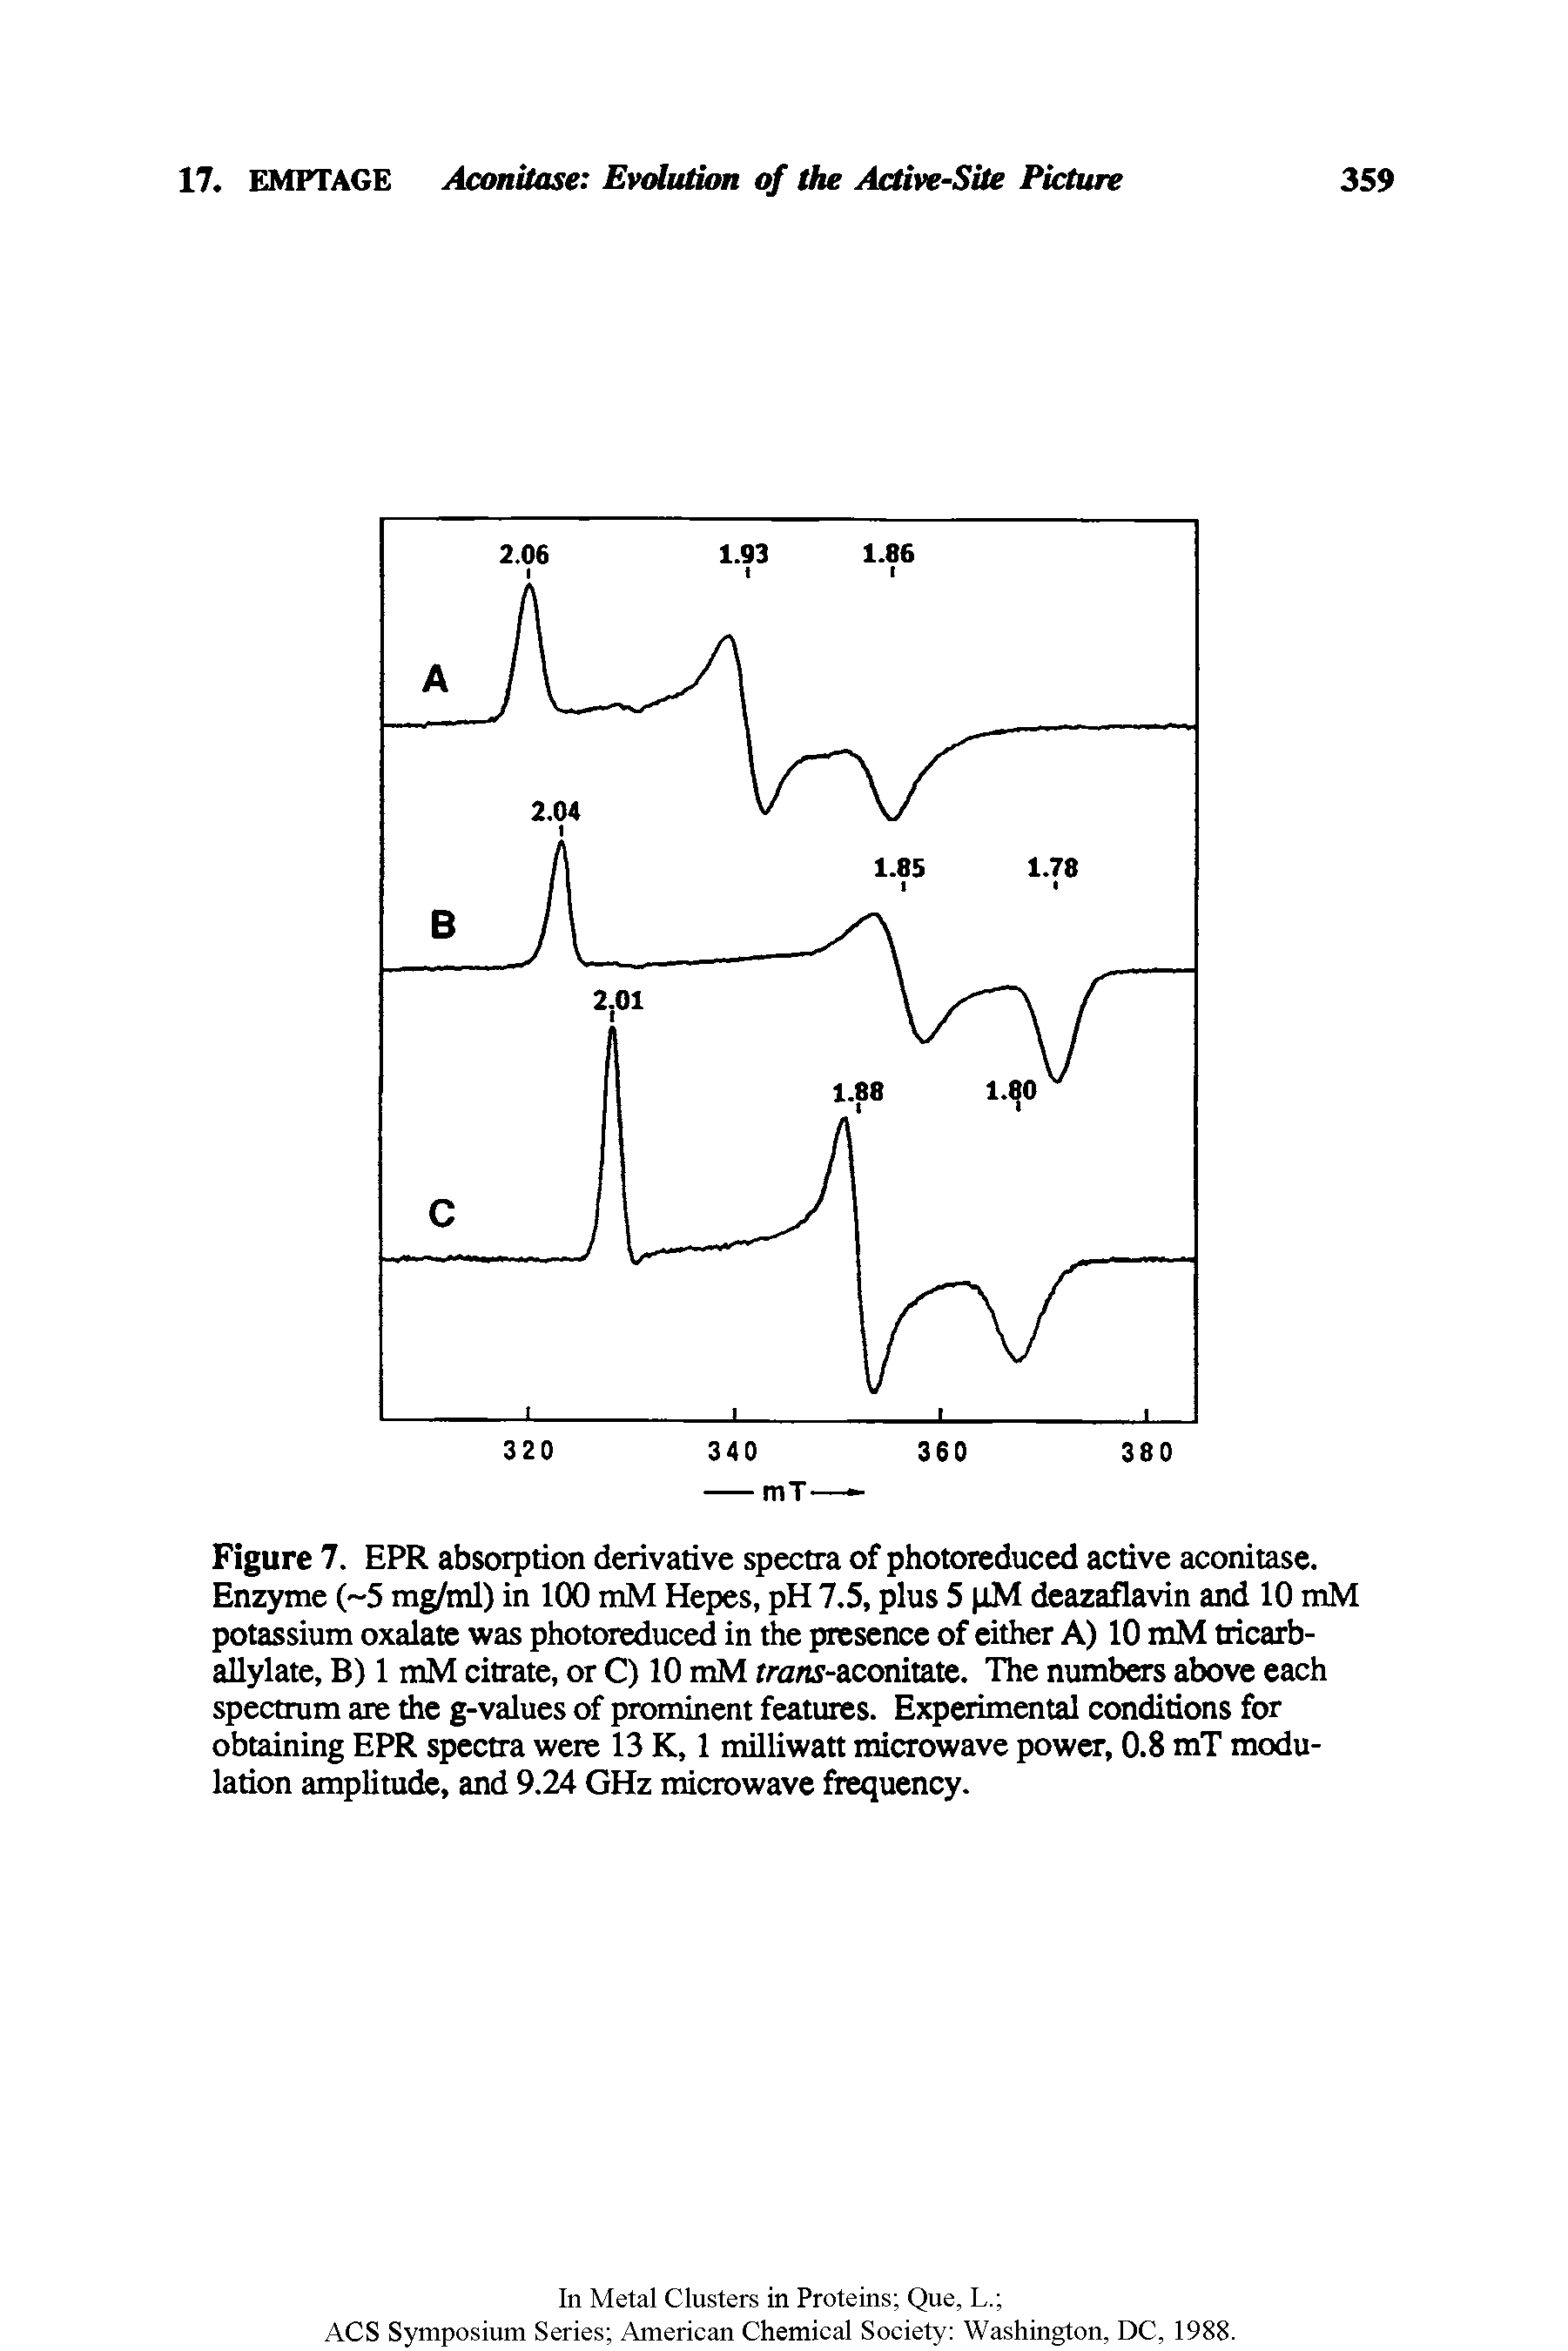 Figure 7. EPR absorption derivative spectra of photoreduced active aconitase. Enzyme ( 5 mg/ml) in 100 mM Hepes, pH 7.5, plus 5 pM deazaflavin and 10 mM potassium oxalate was photoreduced in the presence of either A) 10 mM tricarb-allylate, B) 1 mM citrate, or C) 10 mM rrans-aconitate. The numbers above each spectrum are the g-values of prominent features. Experimental conditions for obtaining EPR spectra were 13 K, 1 milliwatt microwave power, 0.8 mT modulation amplitude, and 9.24 GHz microwave frequency.